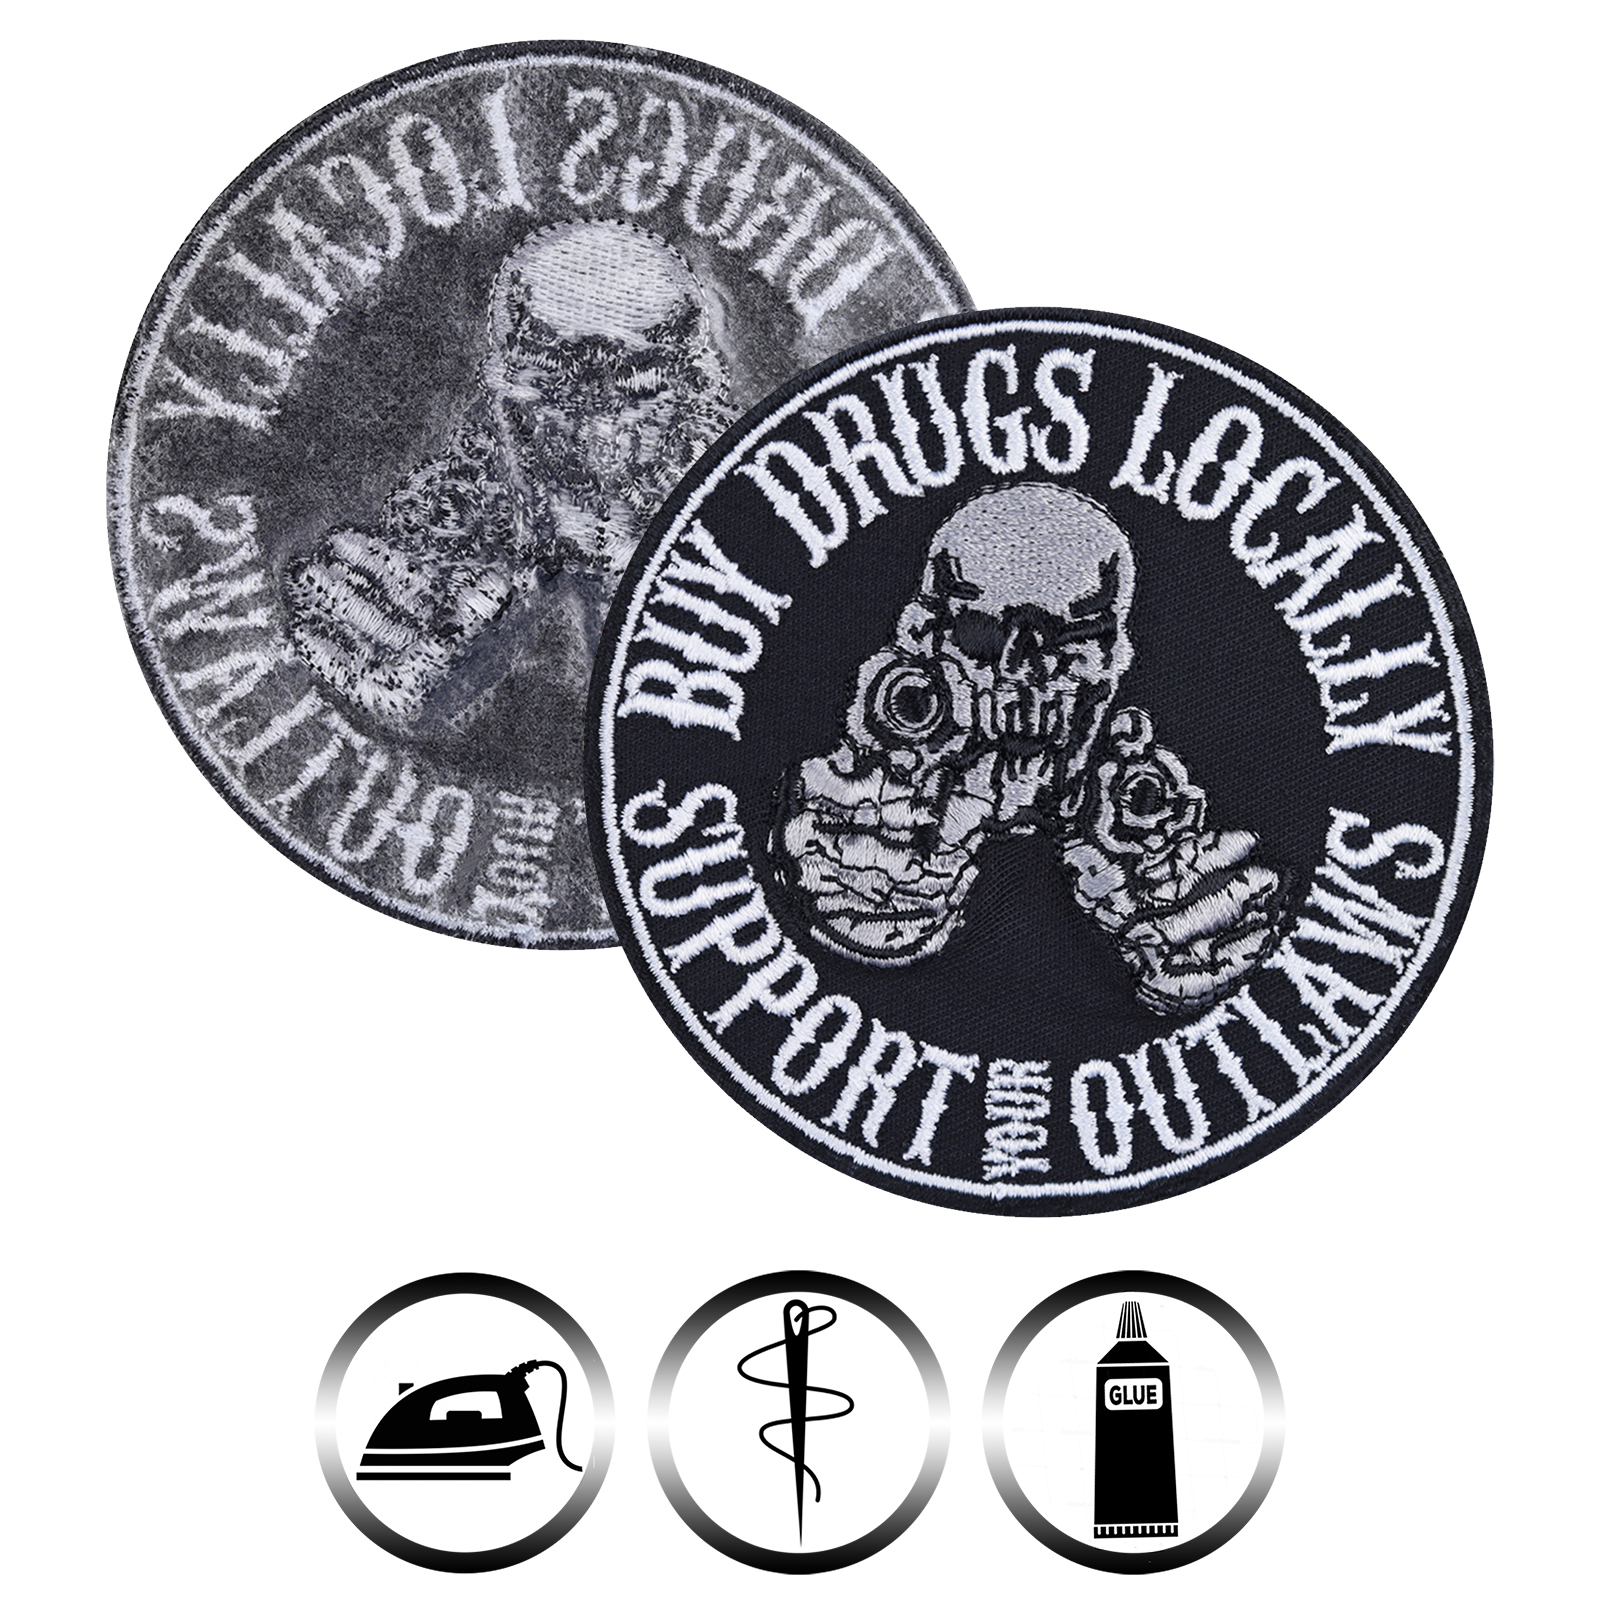 Buy drugs locally, support your outlaws - Patch